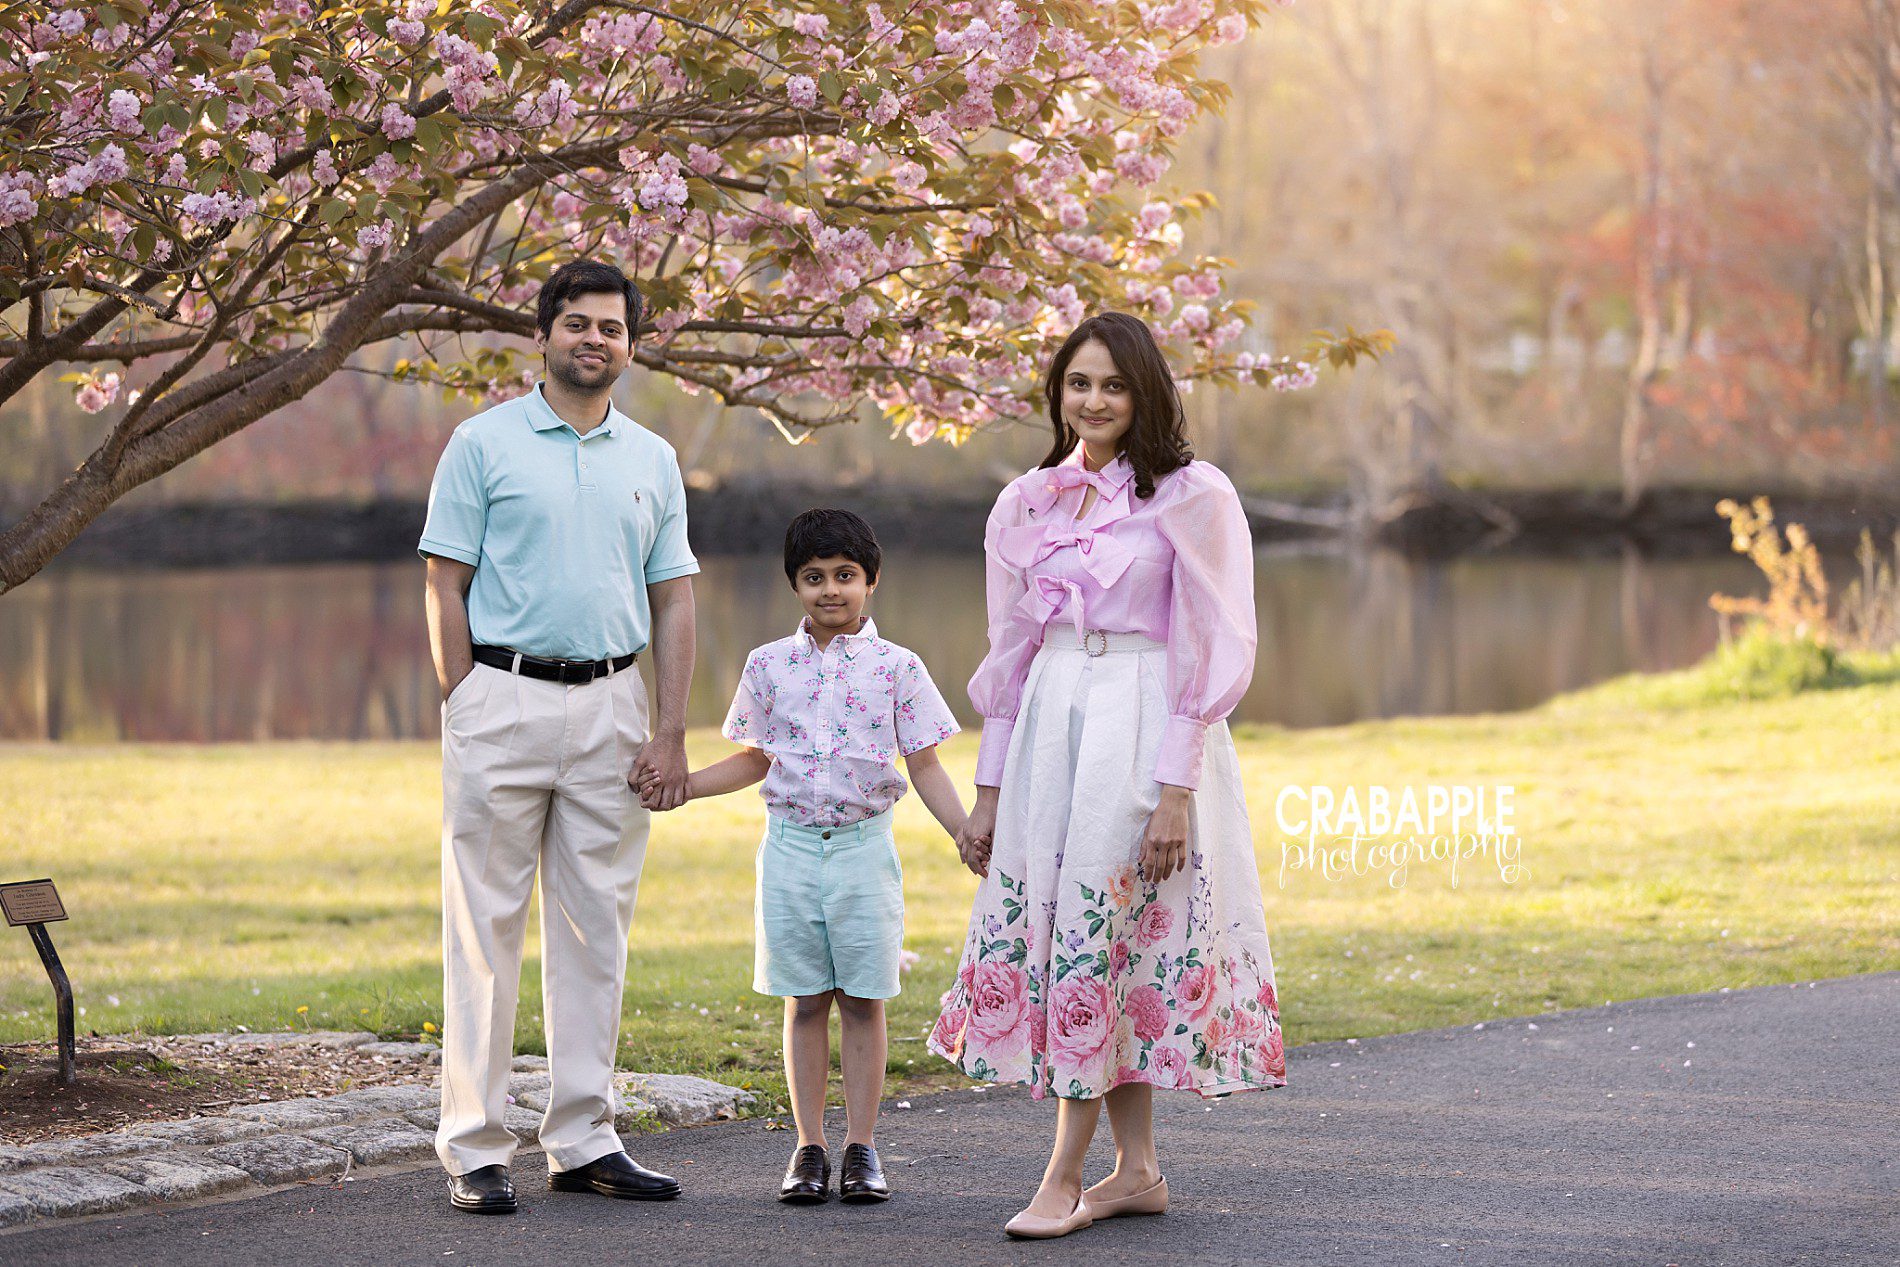 spring styling ideas for outdoor family photos